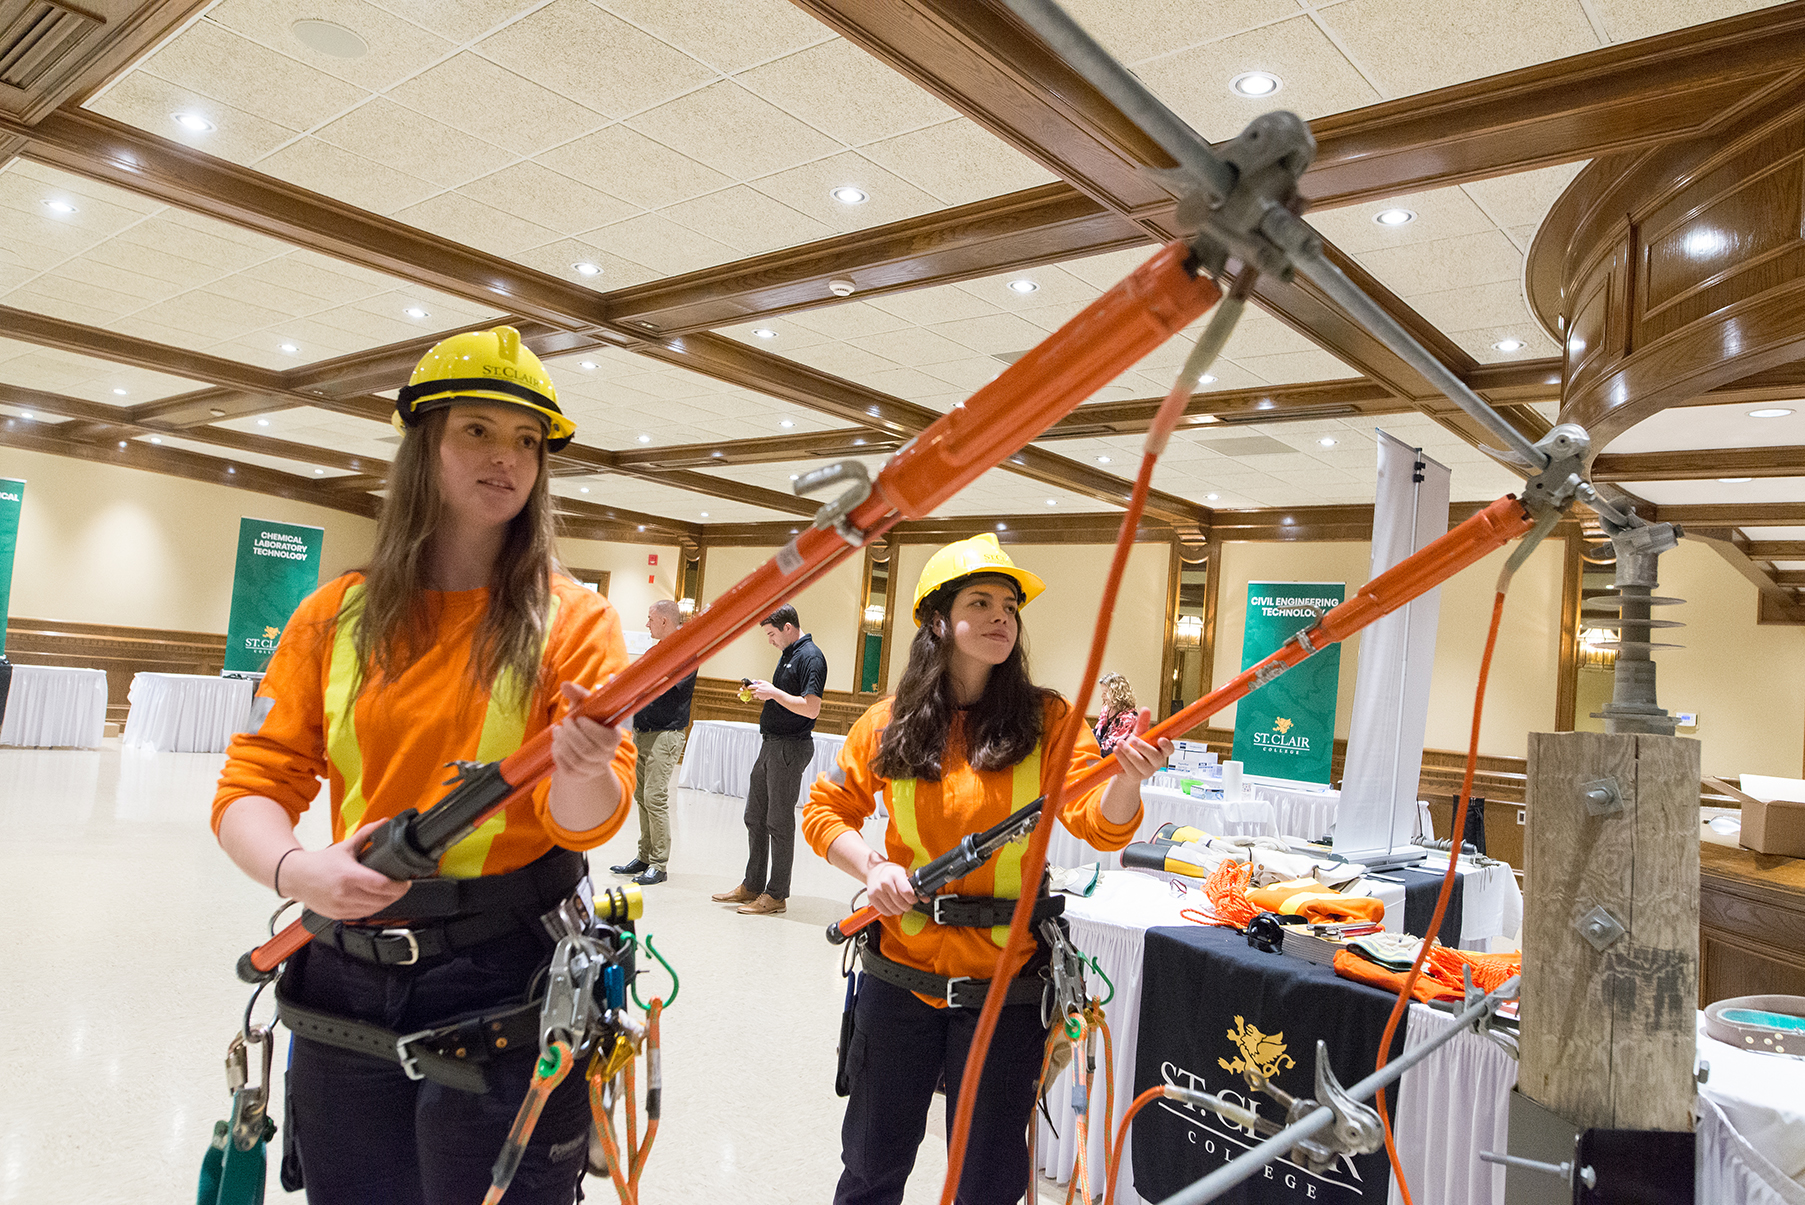 Powerline Tech reps from St. Clair College demonstrate some of their powerline training at a Build a Dream career discovery expo in Windsor, Ontario.